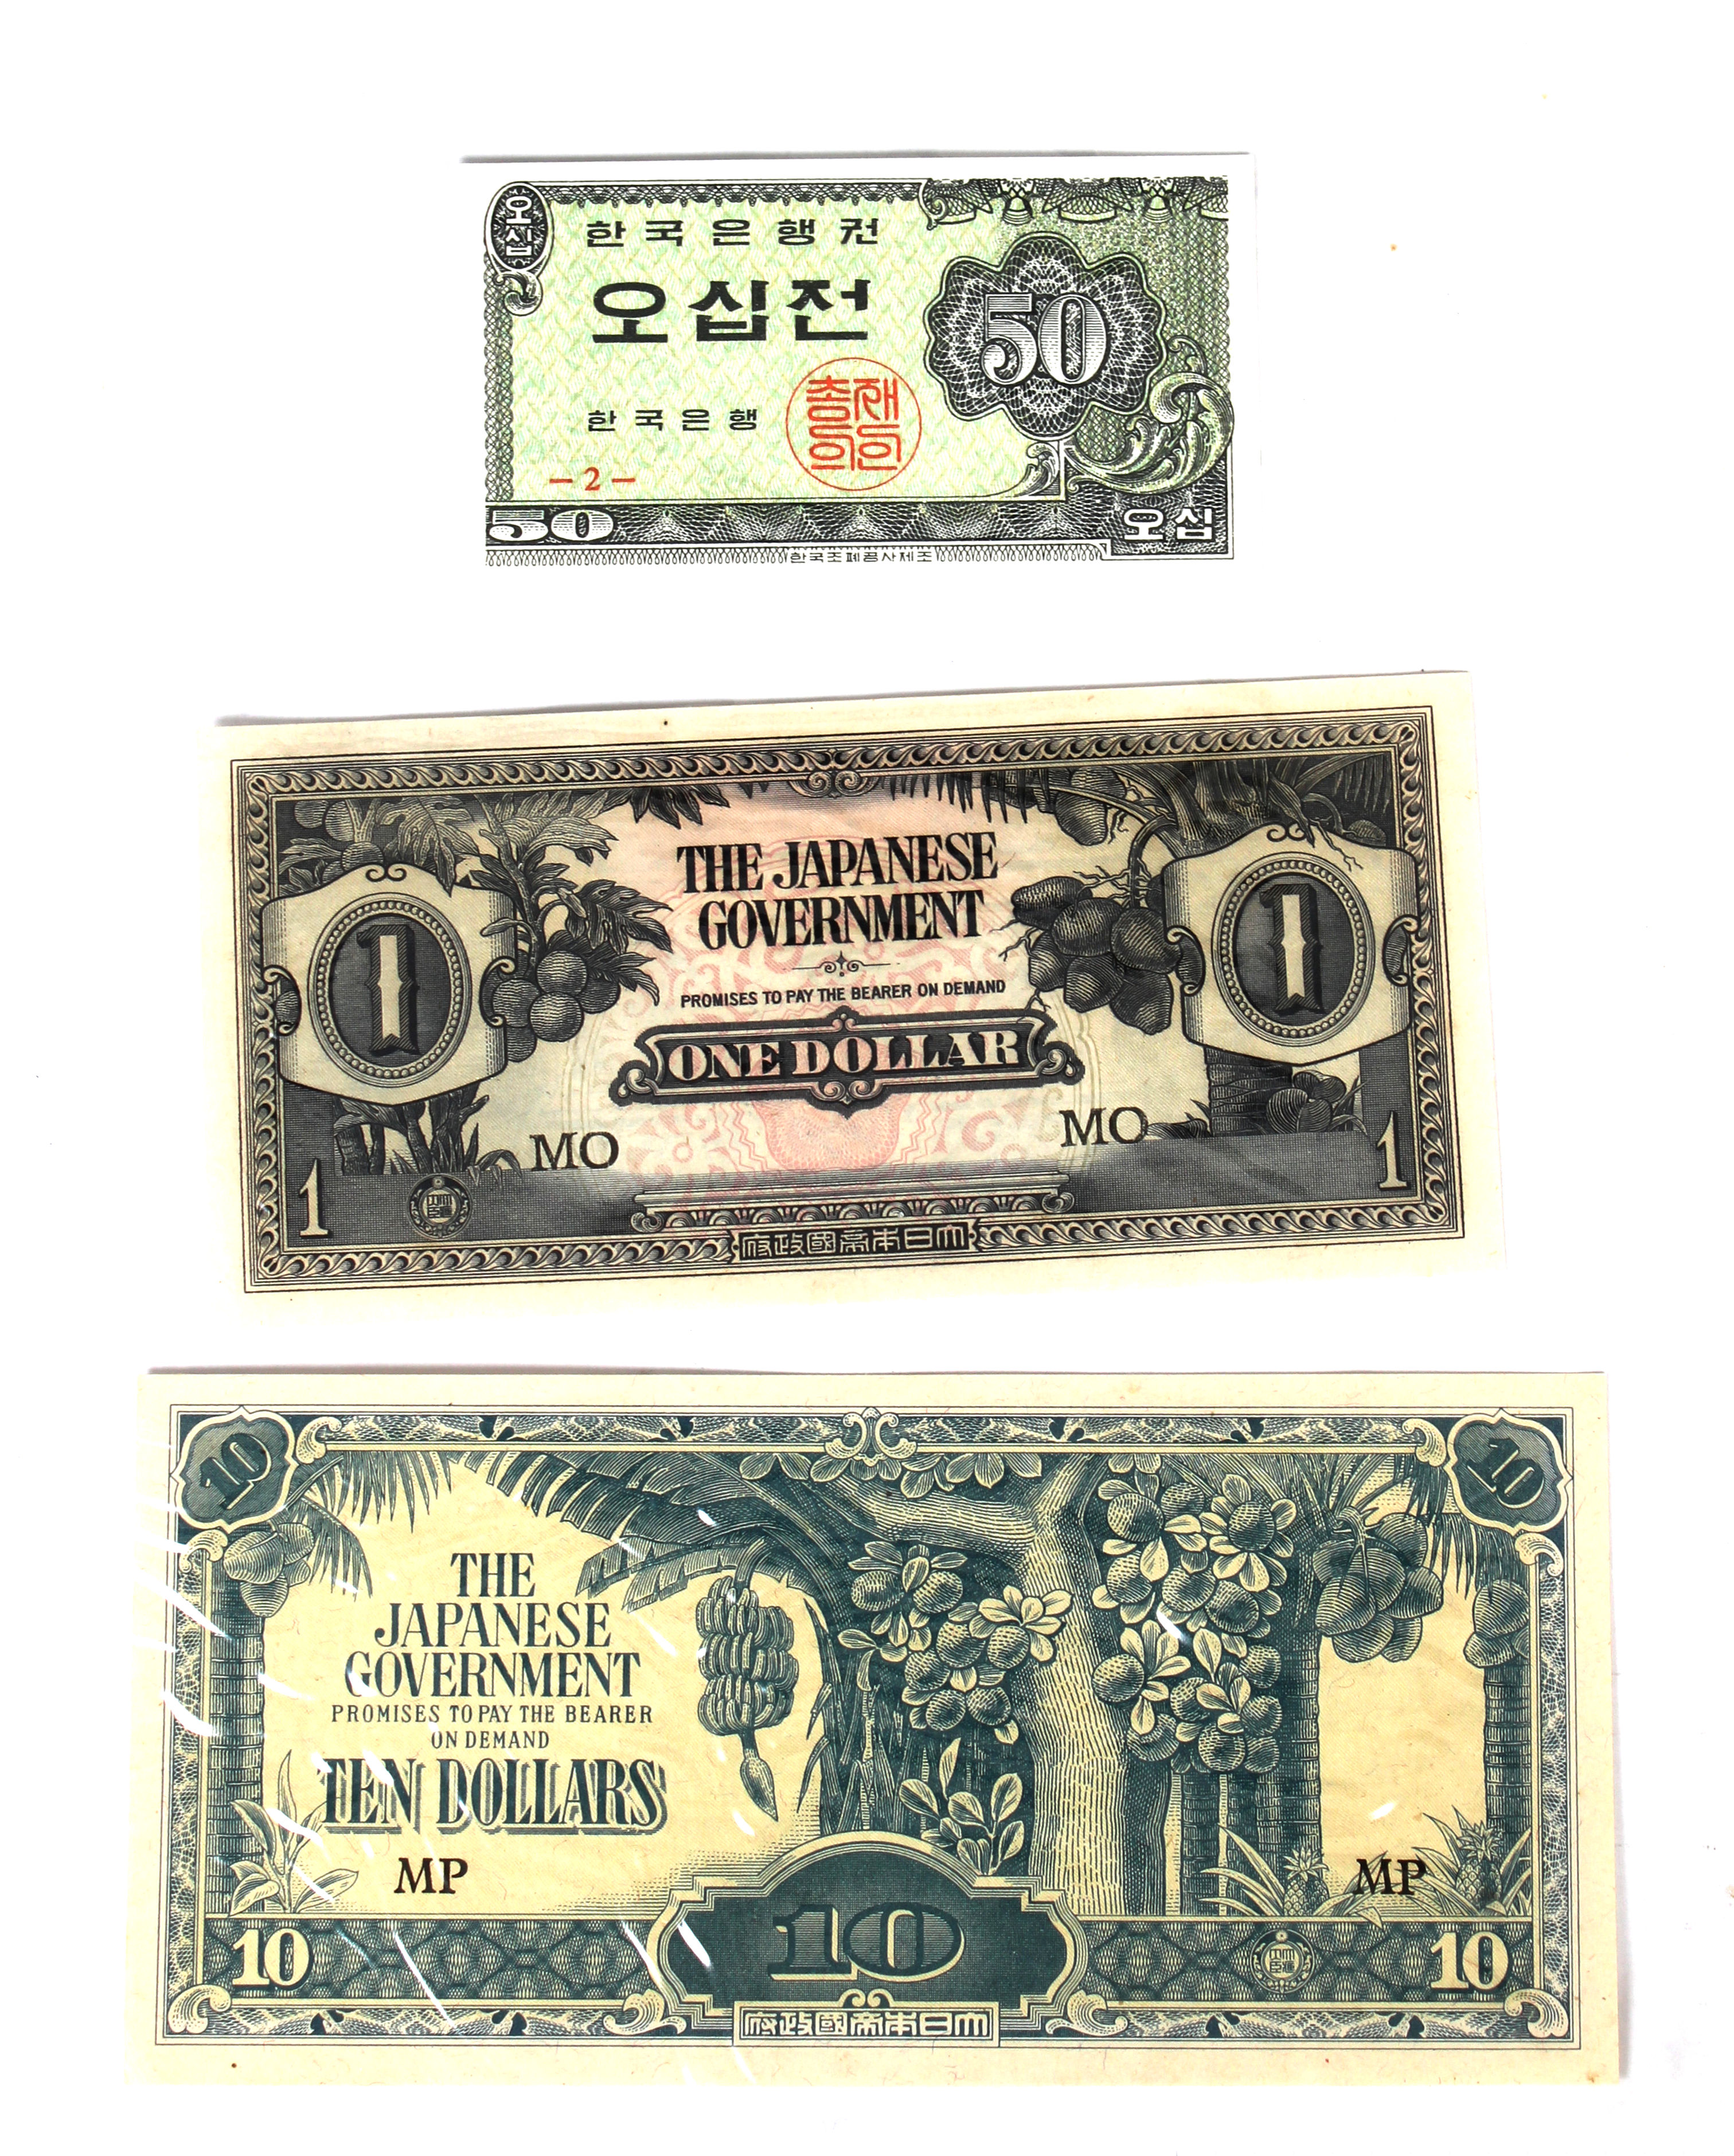 A collection of world wide banknotes